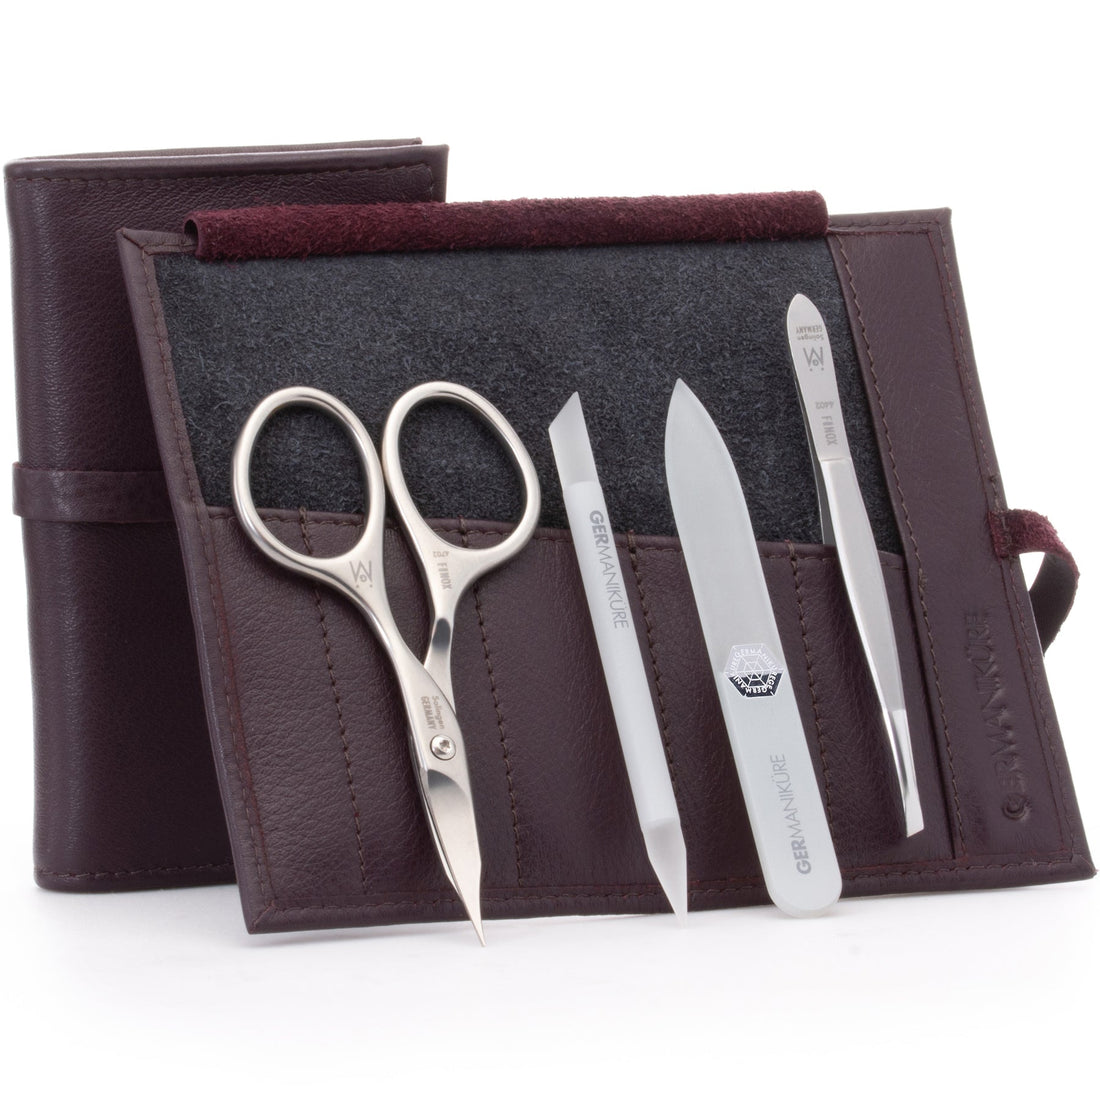 4pc Manicure Set in Suede Roll